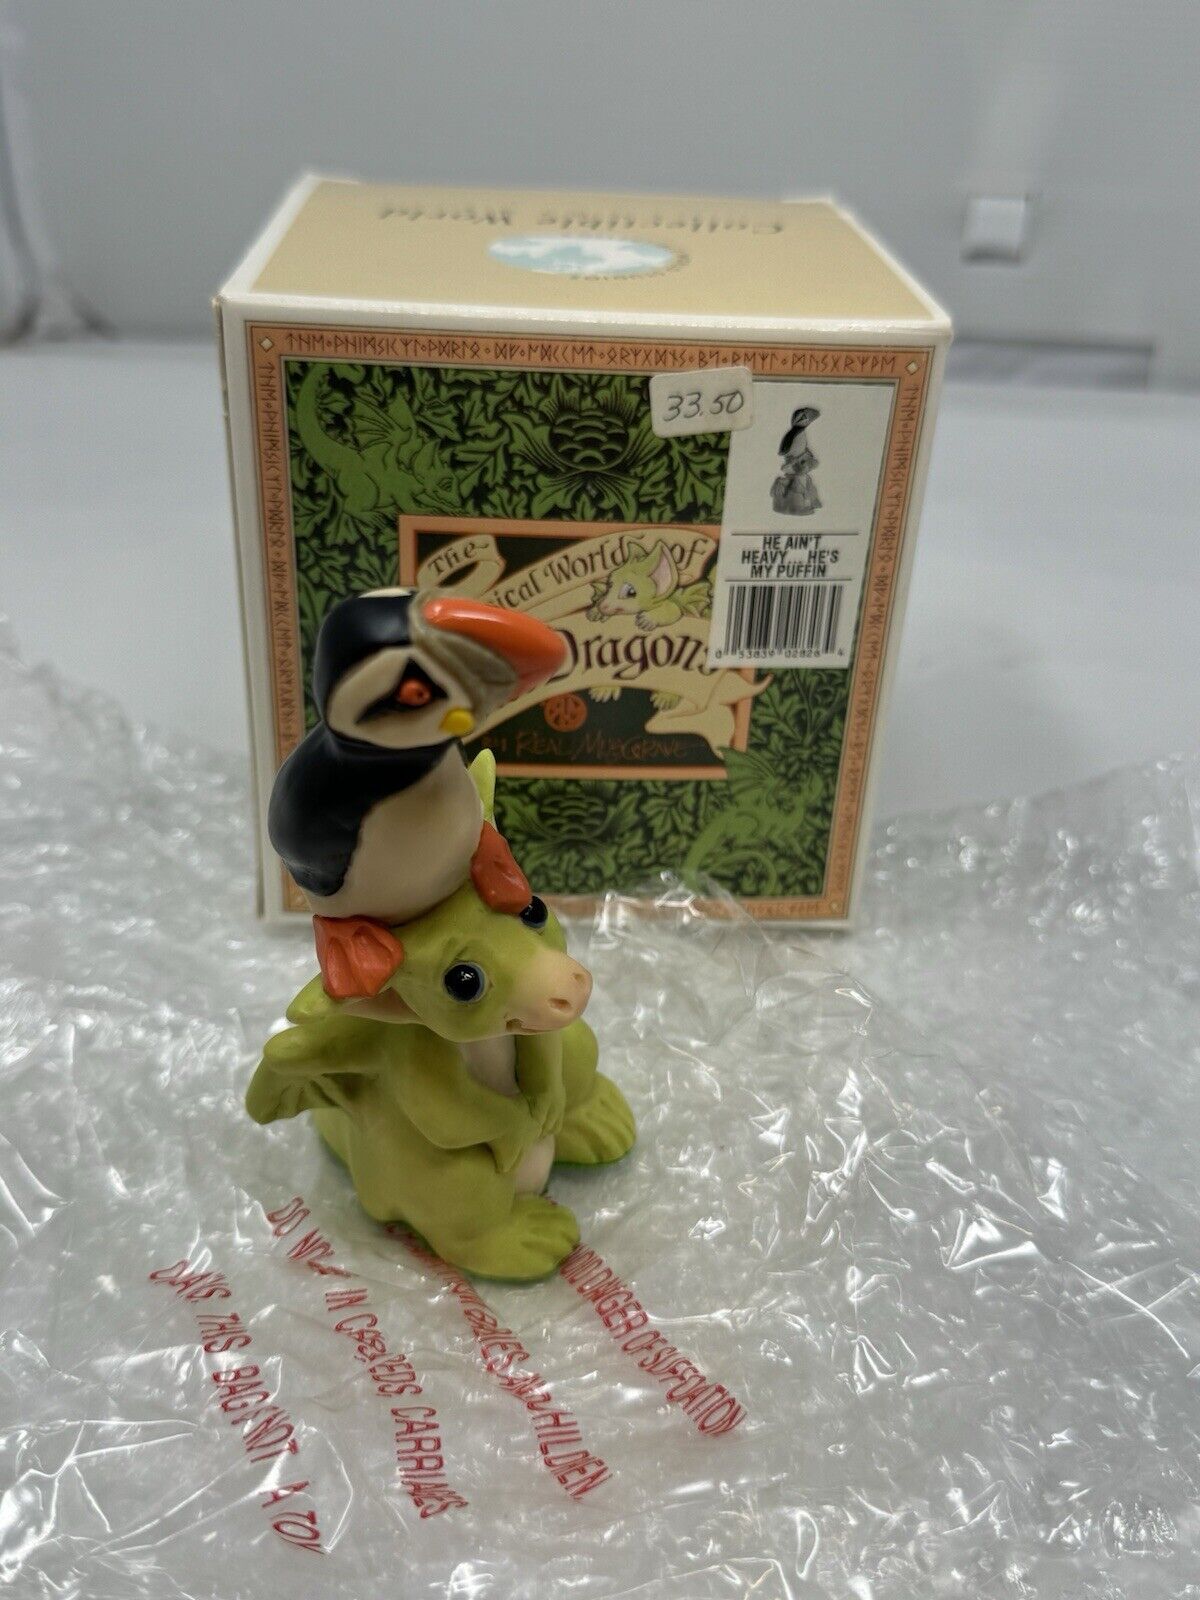 Whimsical World of Pocket Dragons He Ain’t Heavy…He’s My Puffin Undisplayed